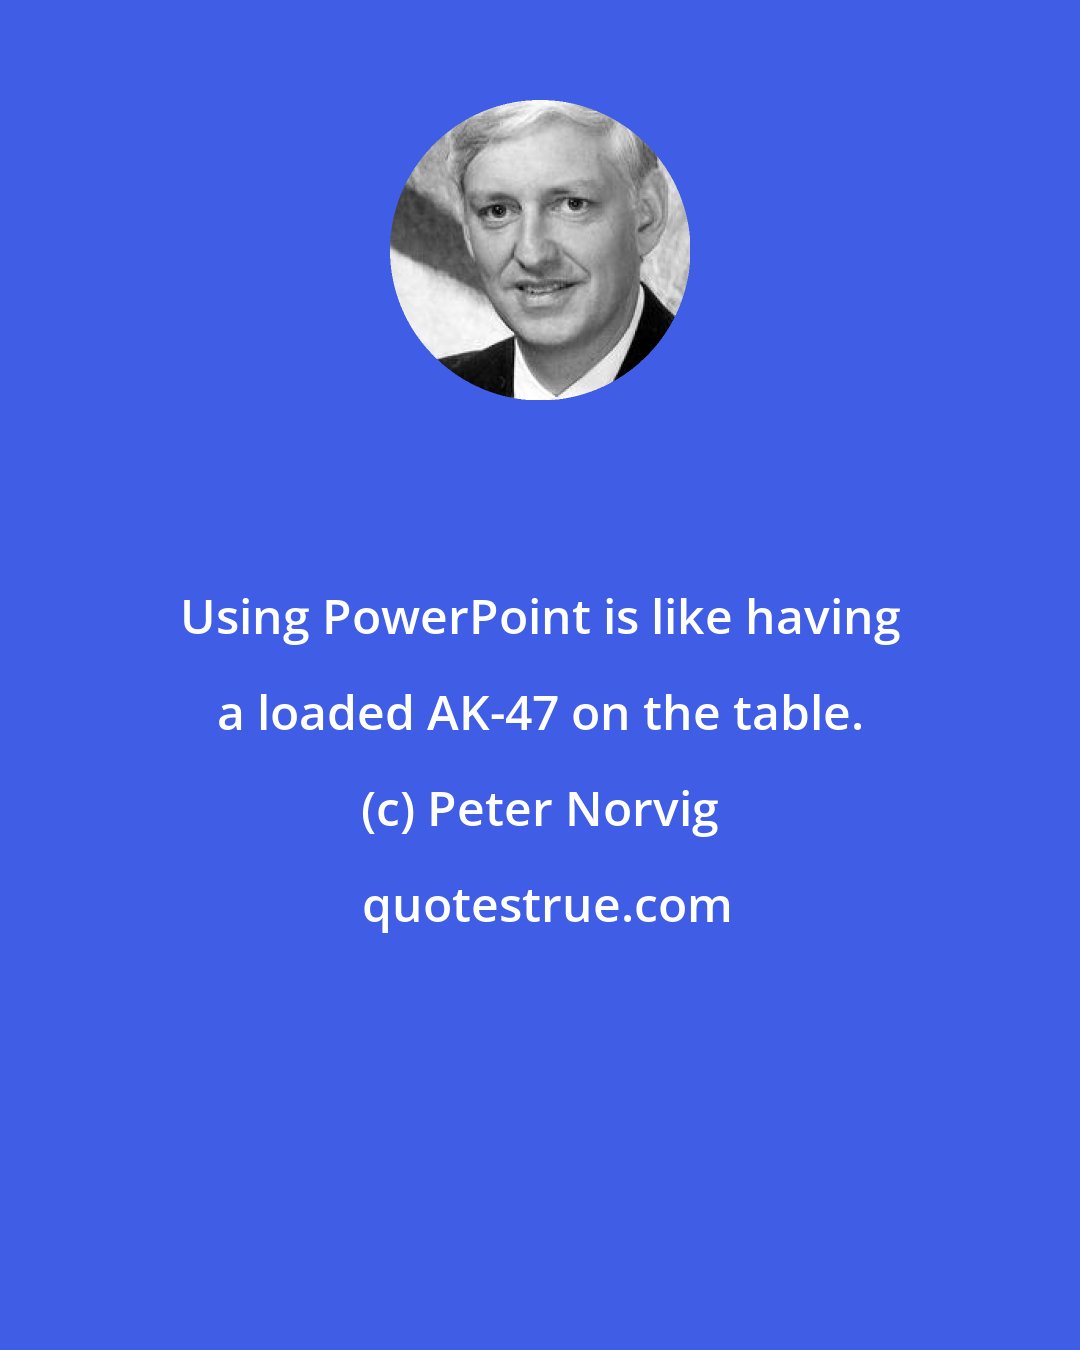 Peter Norvig: Using PowerPoint is like having a loaded AK-47 on the table.